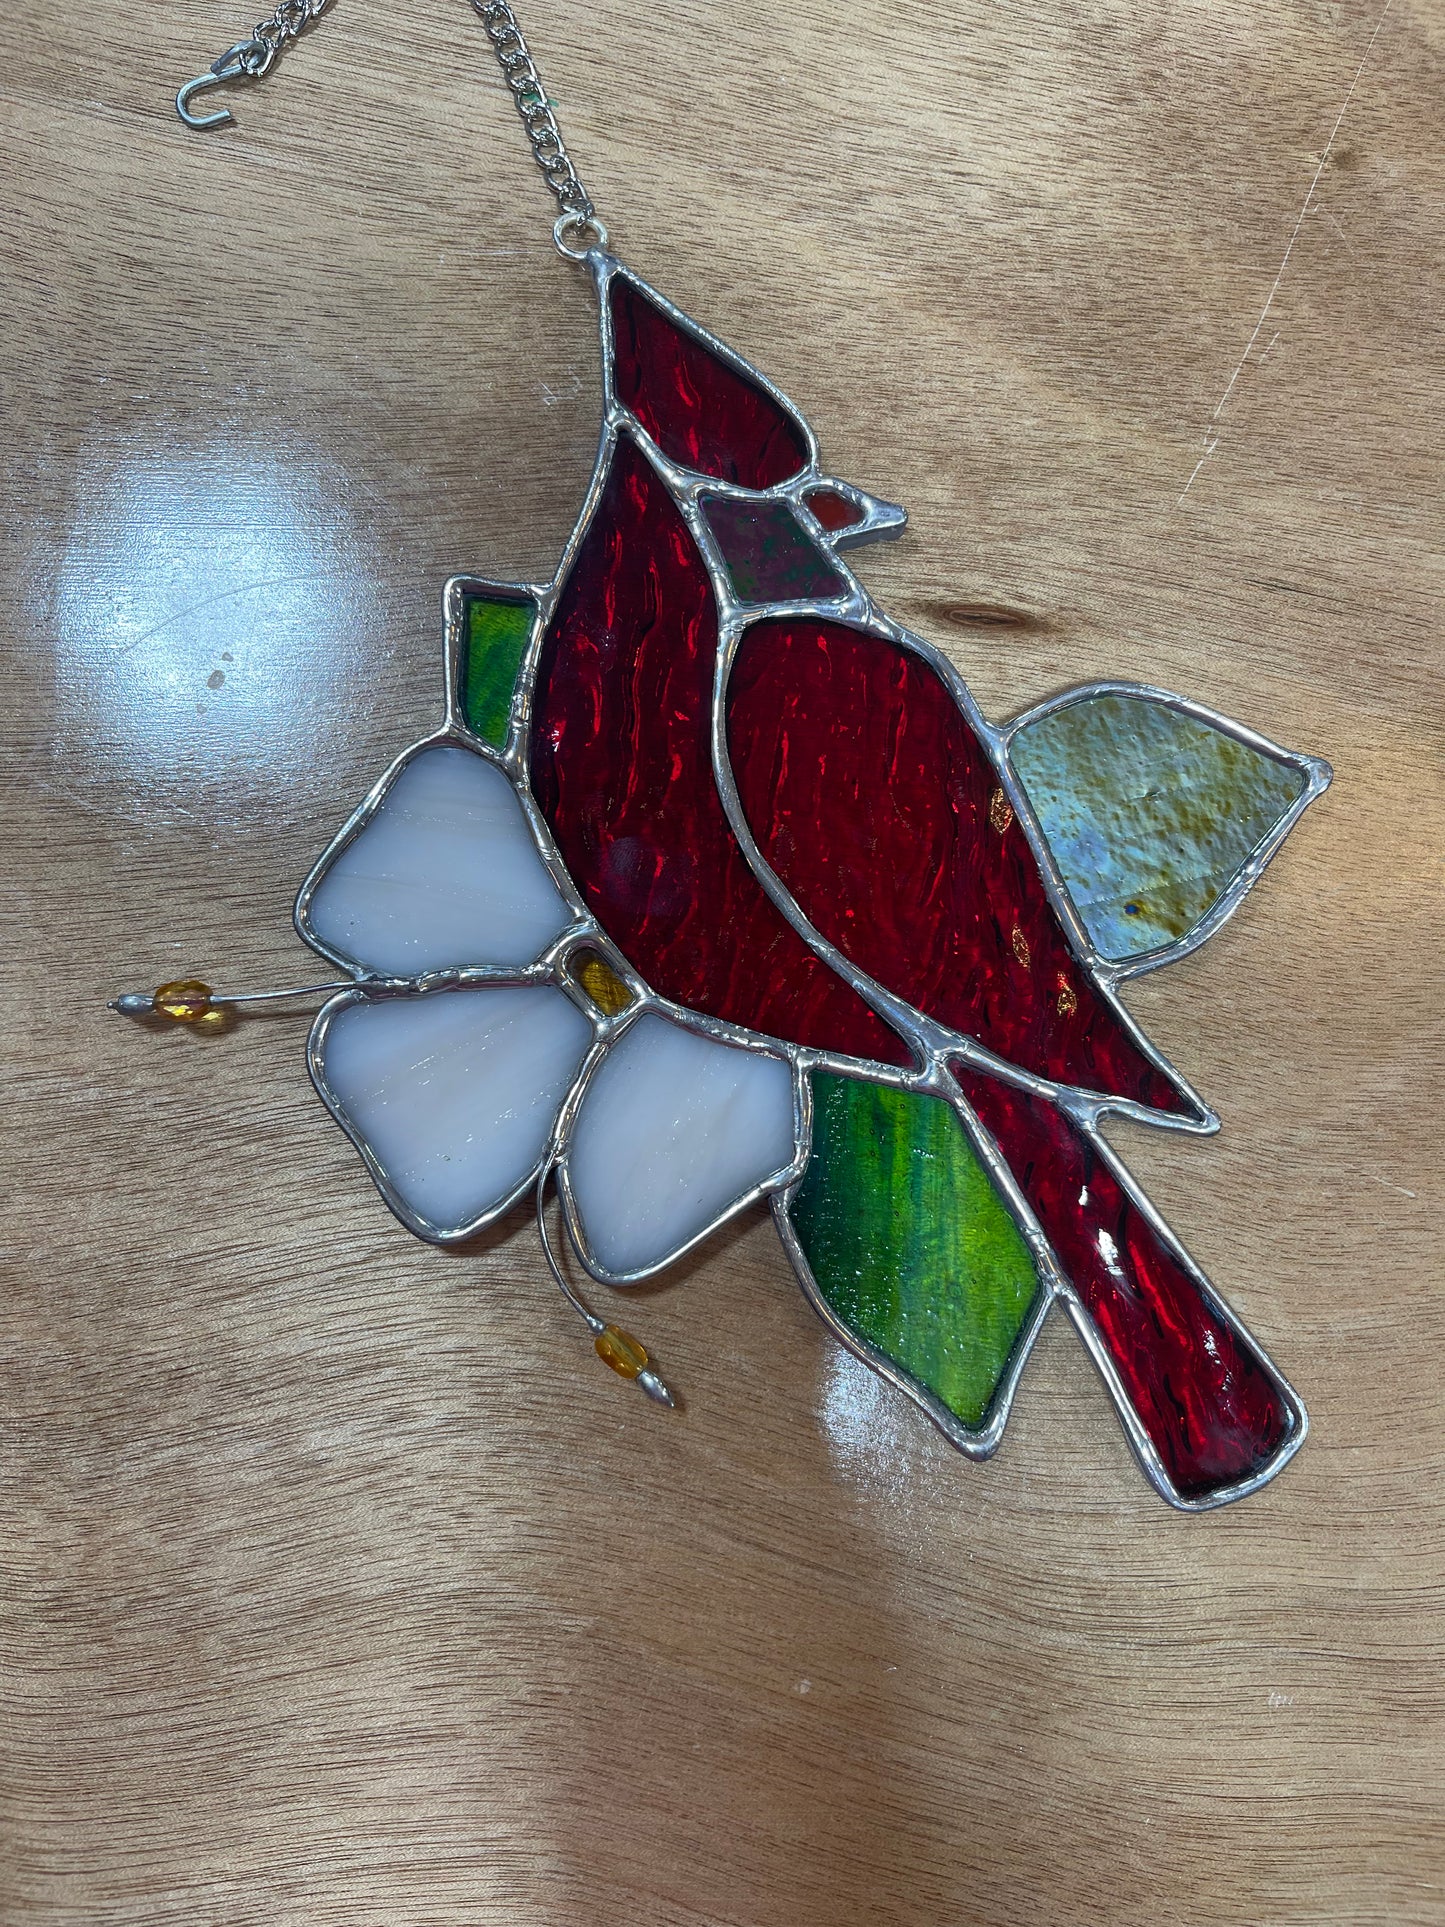 Cardinal on Flower (Stained Glass Window Hanging)